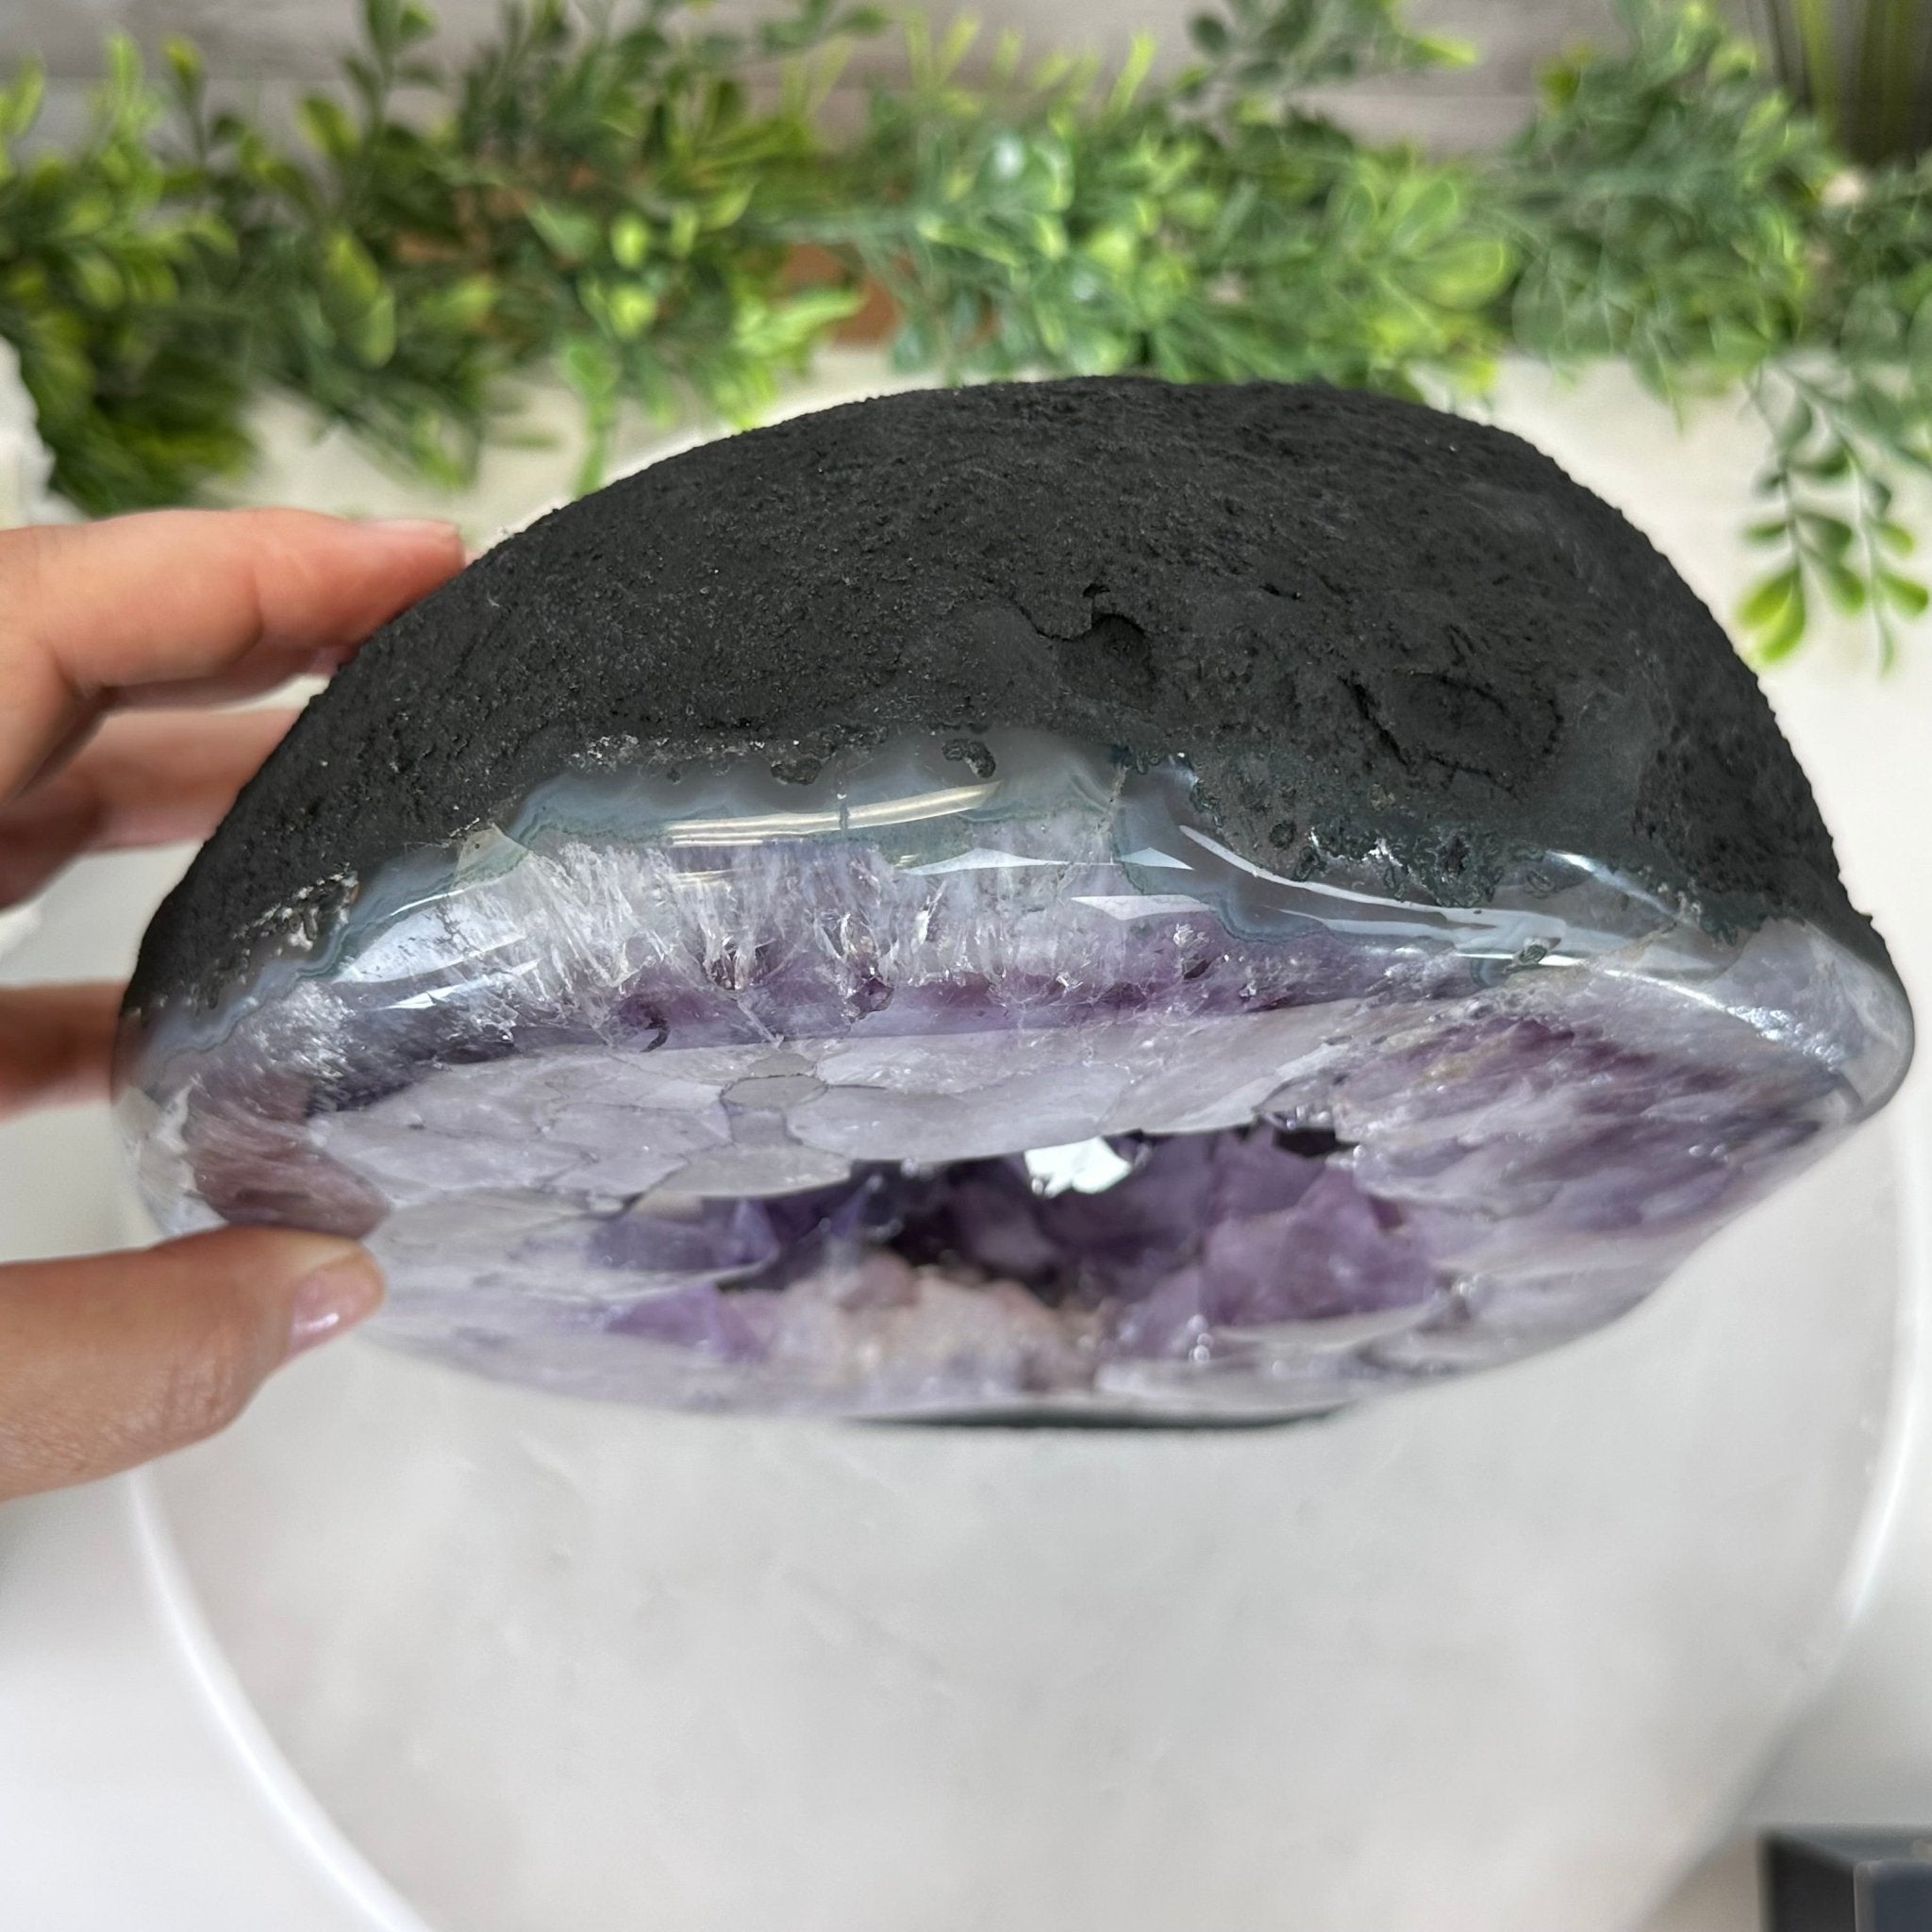 Standard Quality Amethyst Crystal on Cement Base, 22.8 lbs and 12.3" Tall #5614-0090 - Brazil GemsBrazil GemsStandard Quality Amethyst Crystal on Cement Base, 22.8 lbs and 12.3" Tall #5614-0090Clusters on Cement Bases5614-0090